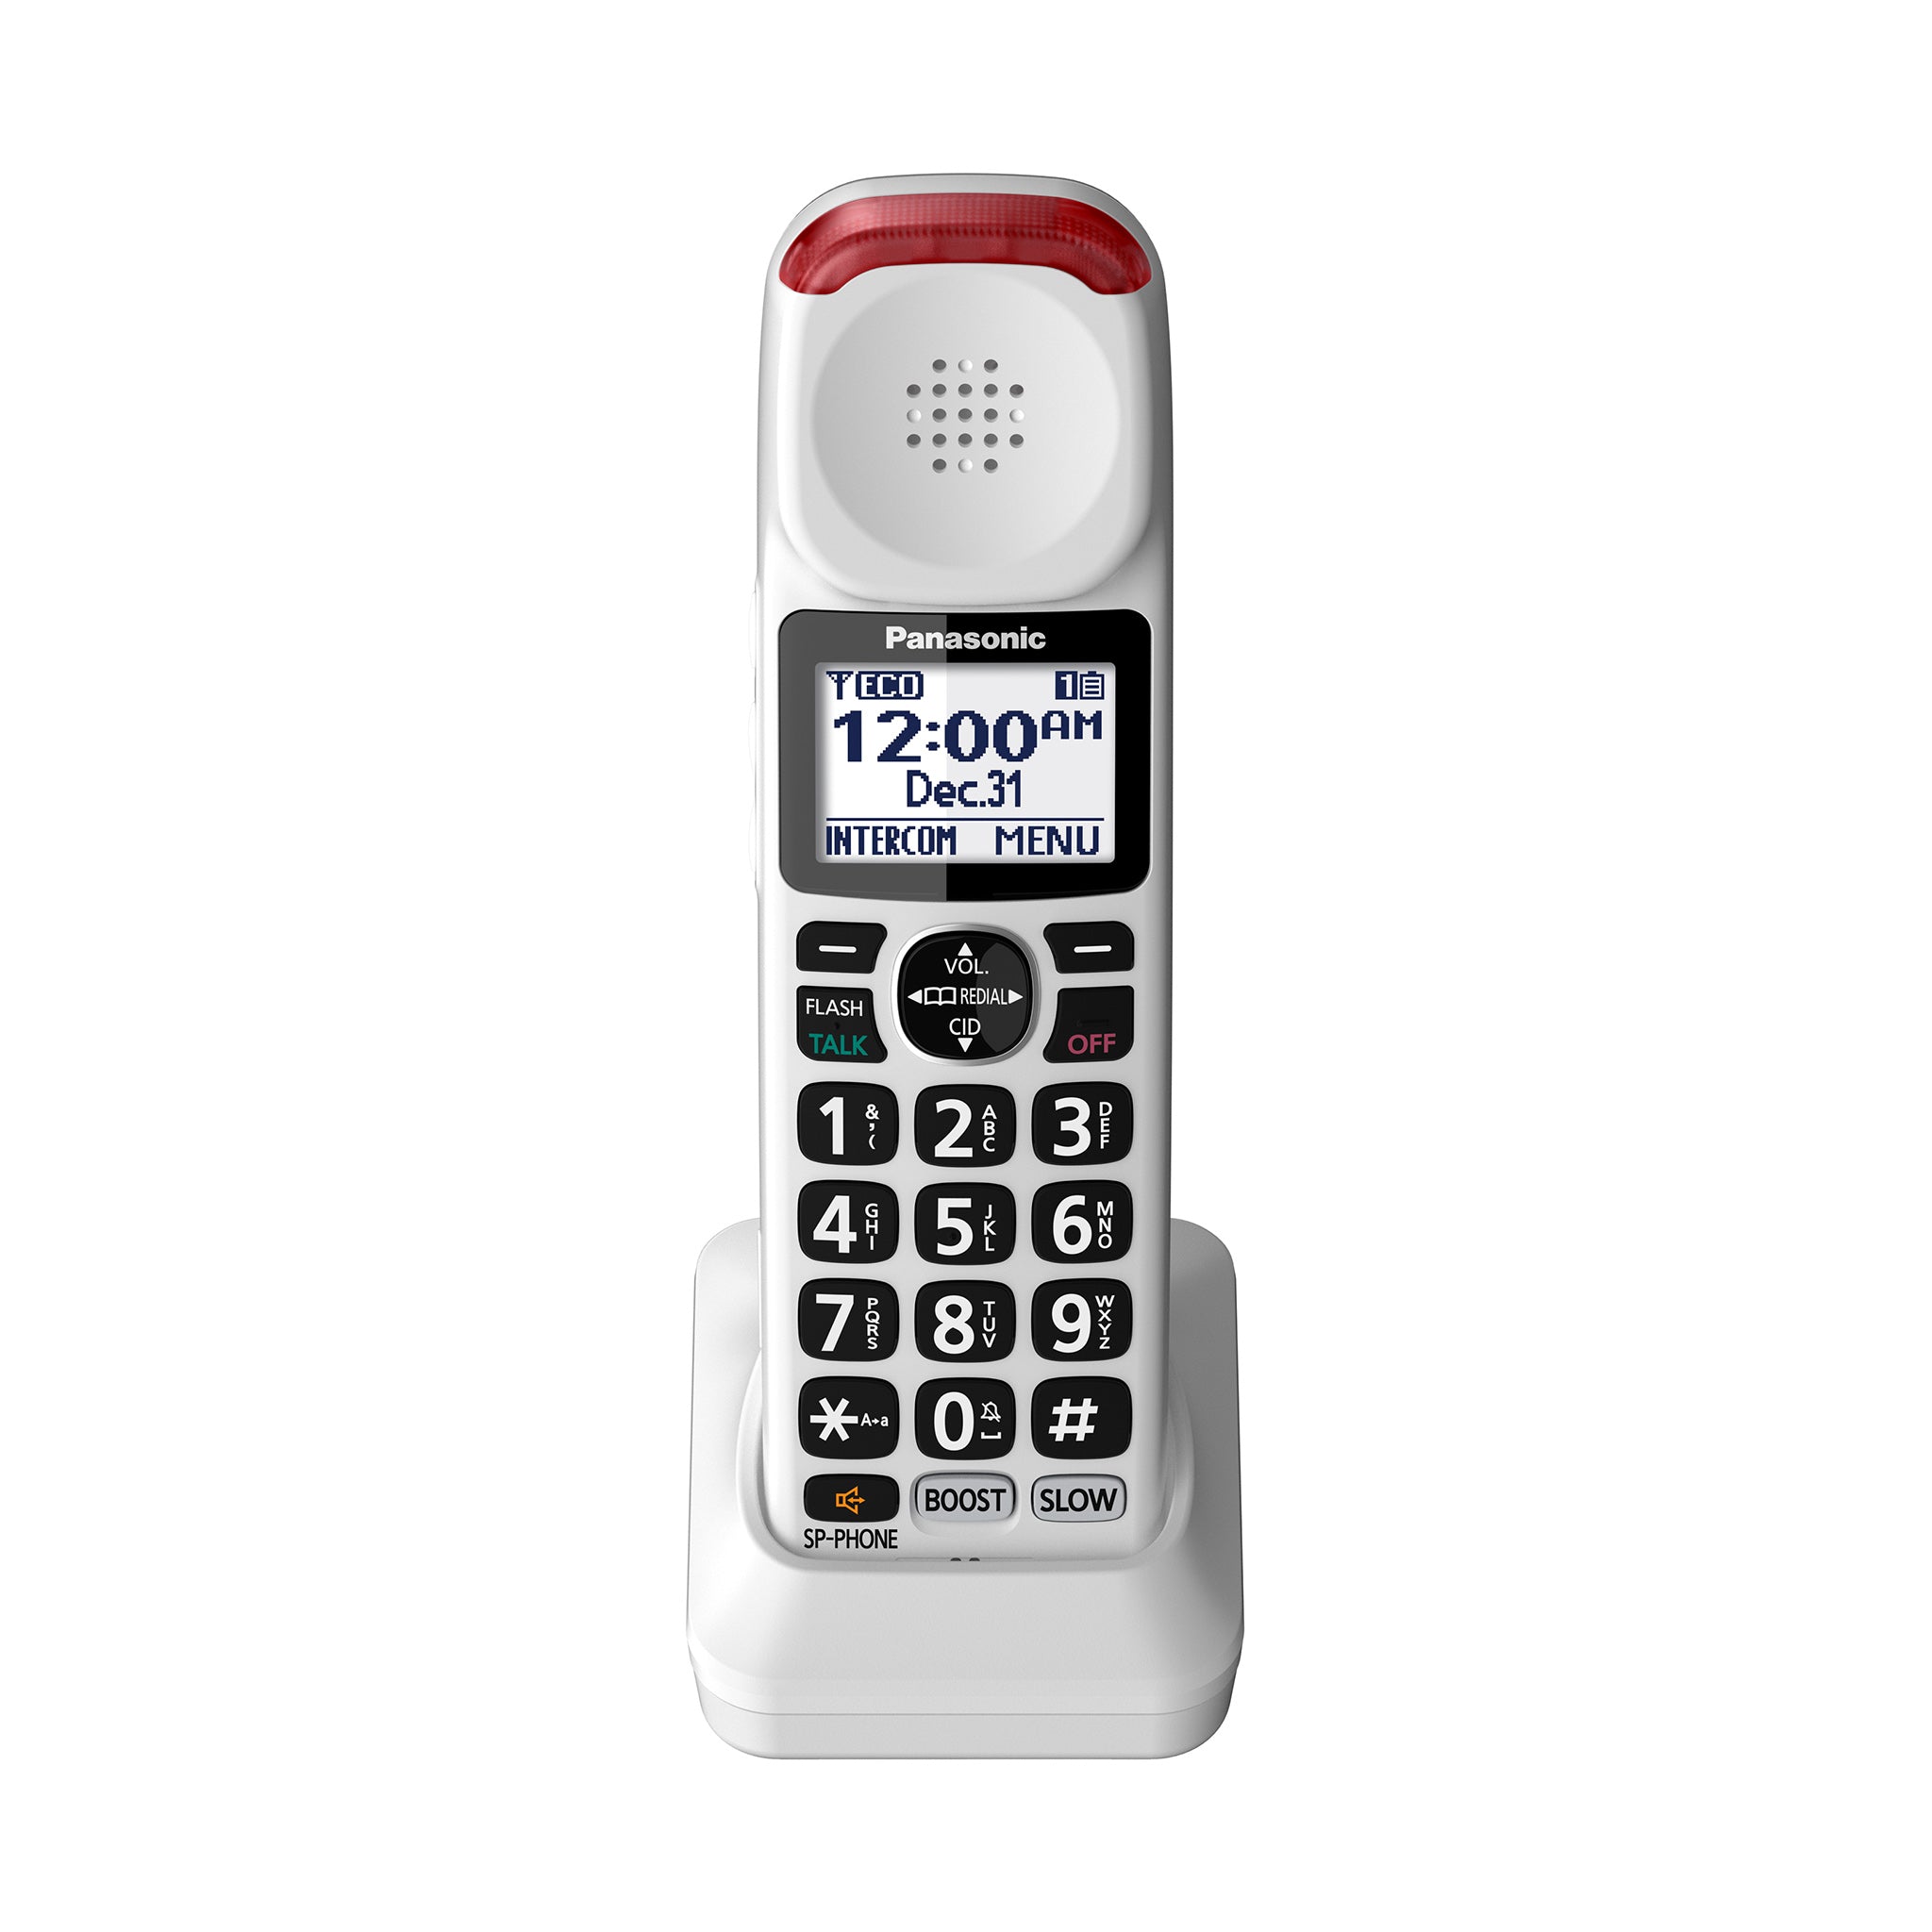 Amplified Cordless Phone Handset Accessory- TGMA44